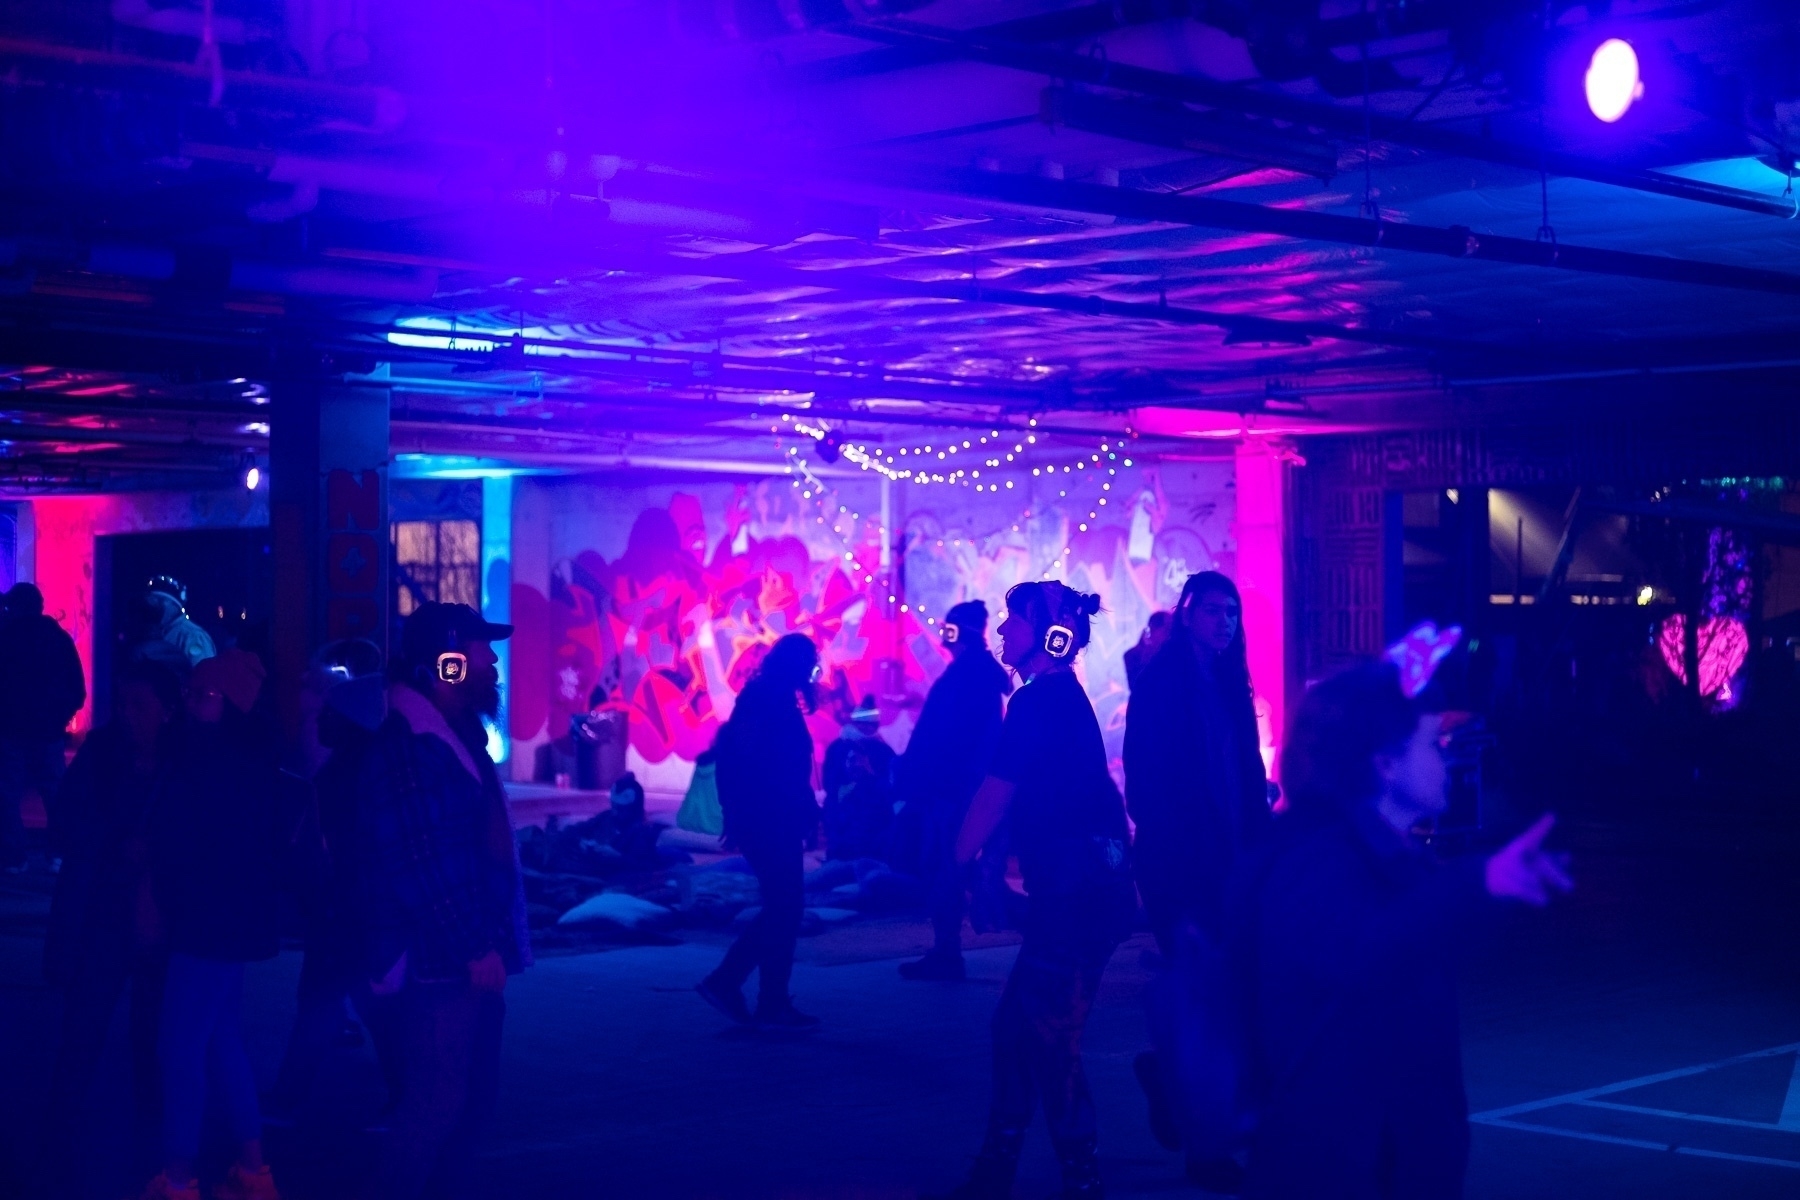 People dancing at a silent disco in a dimly lit space with bright pops of colorful lights.